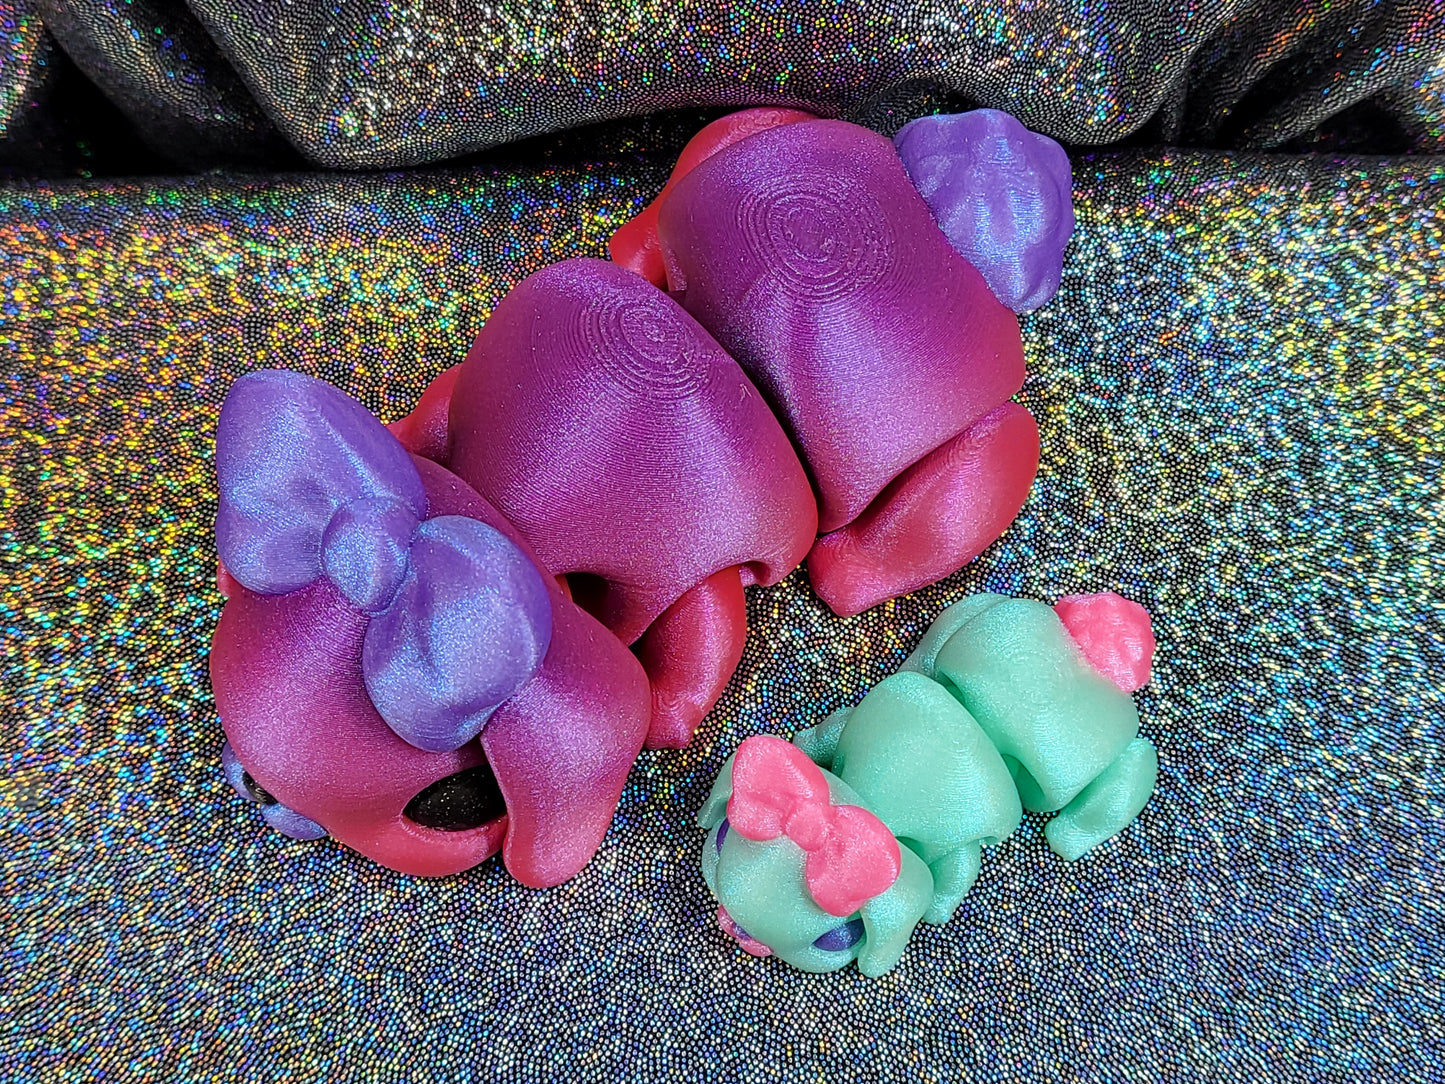 Articulated Bunnies With Eggs, Adult desk Buns